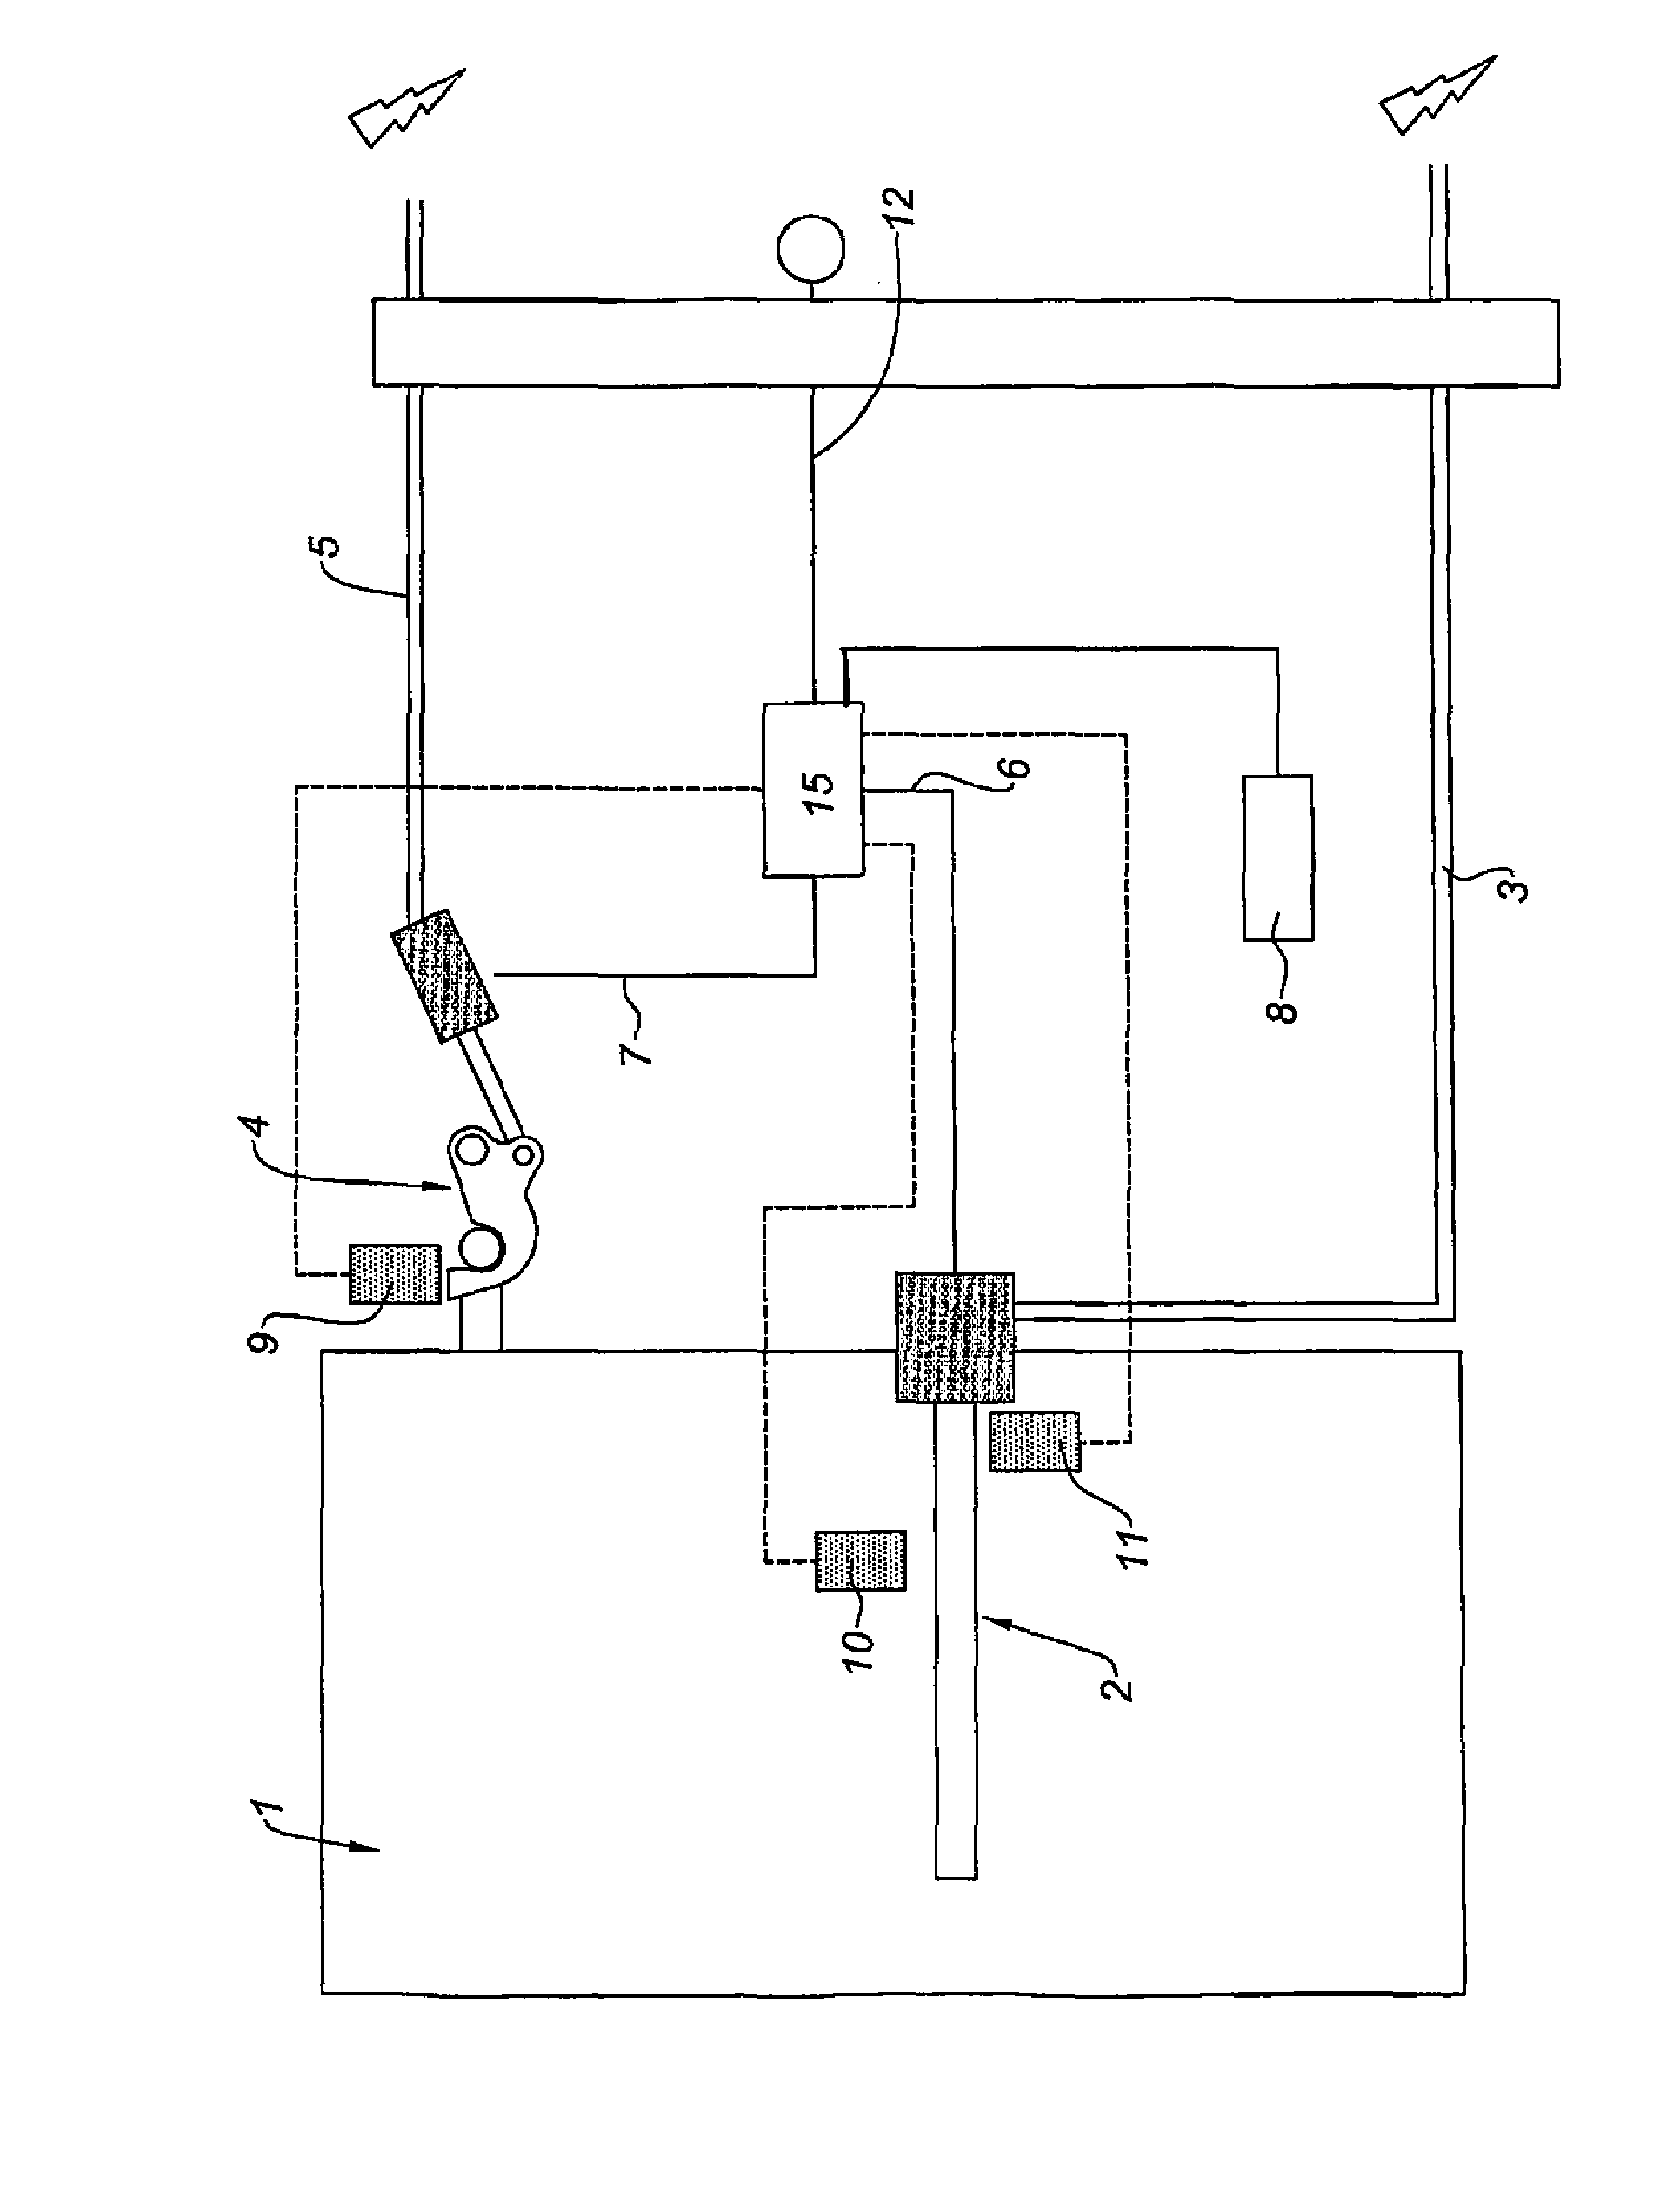 System for actuating and controlling the mobile cowling of a turbojet engine nacelle